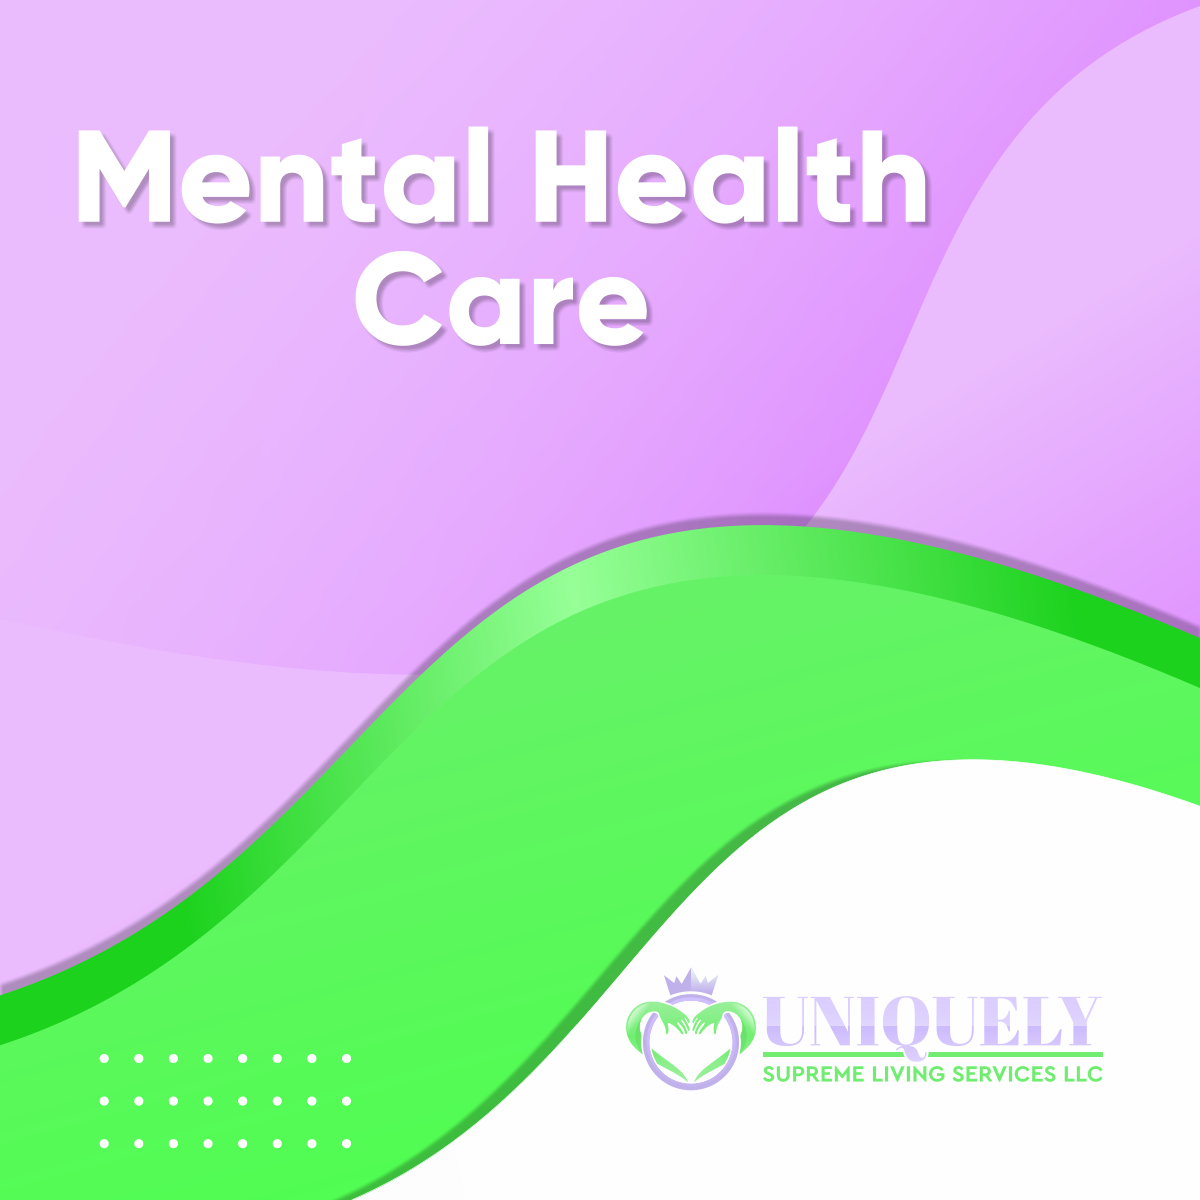 As home care providers, mental health care is important. We provide professional mental health support and care to individuals and assist them throughout their recovery journey.

#JenkintownPA #HomeCare #MentalHealthCare #Seniors